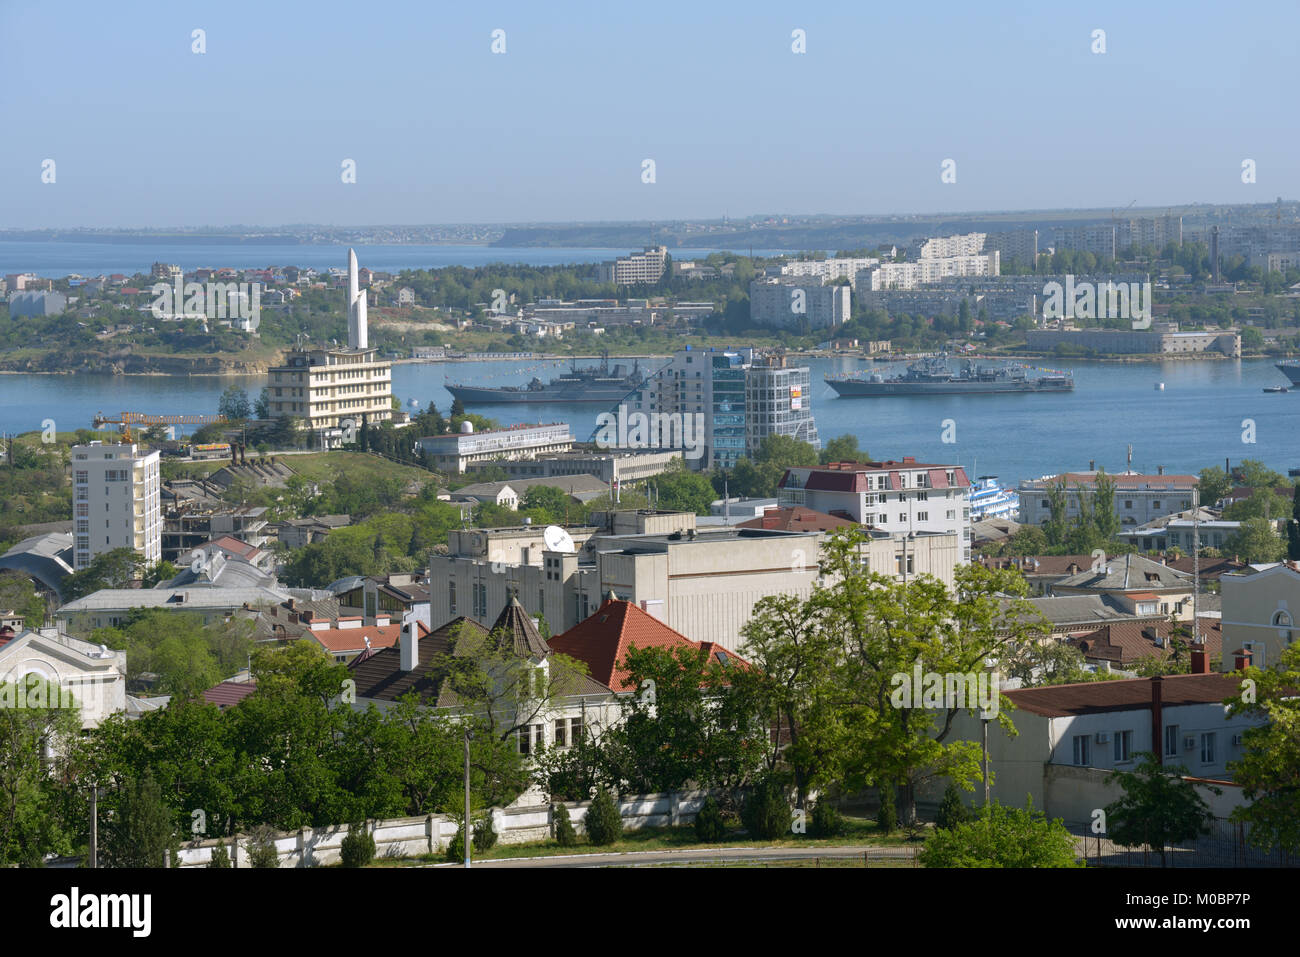 Sevastopol, Ukraine - May 9, 2013: Warships anchored in the bay of Sevastopol, Crimea, Ukraine on May 9, 2013. Ships celebrate the Victory Day and pre Stock Photo